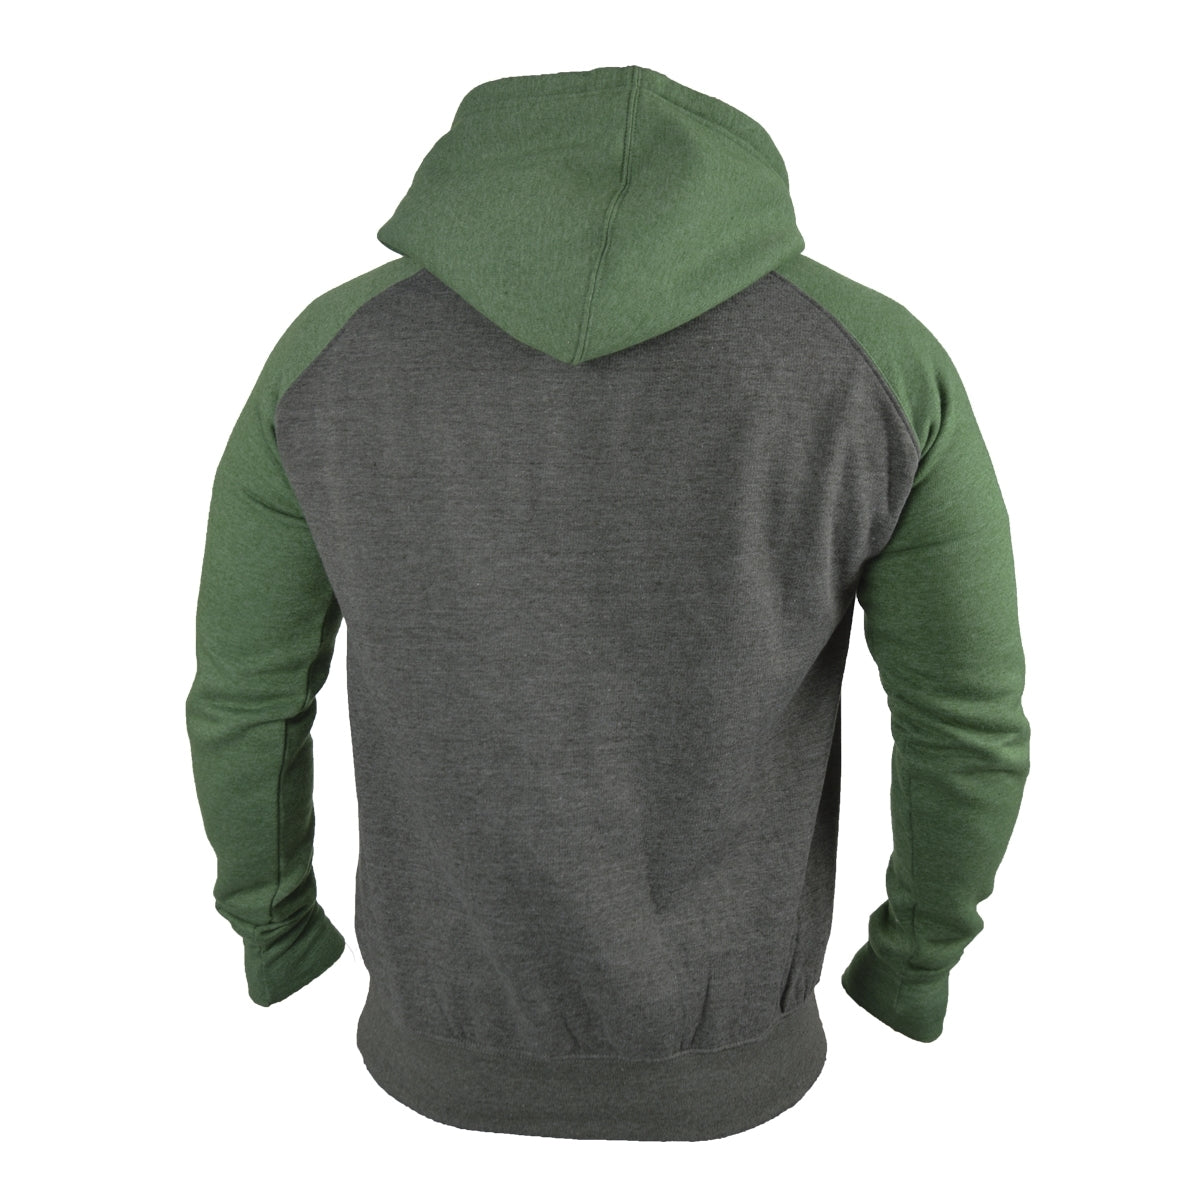 The back view of a man in a Guinness Grey and Green Hoodie from Guinness.